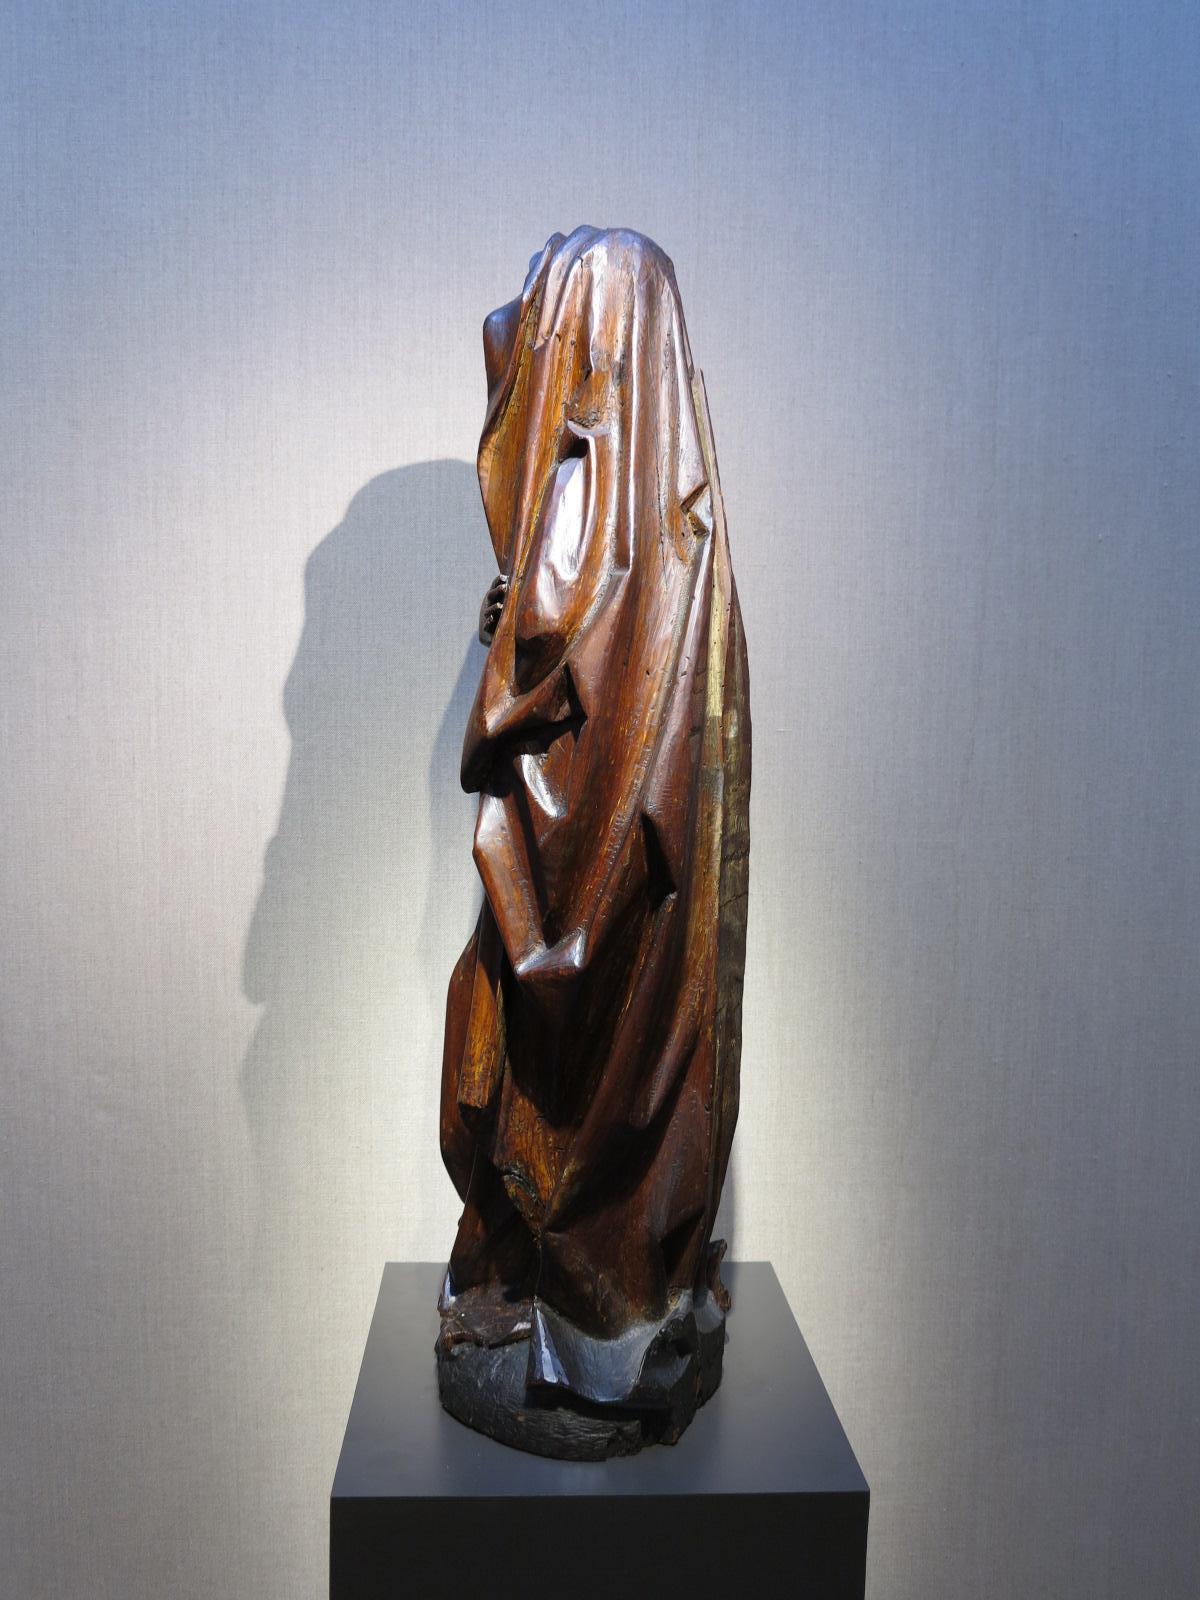 Late 15th-century Old Master Burgundian Netherlands carved walnut figure  - Old Masters Sculpture by Unknown